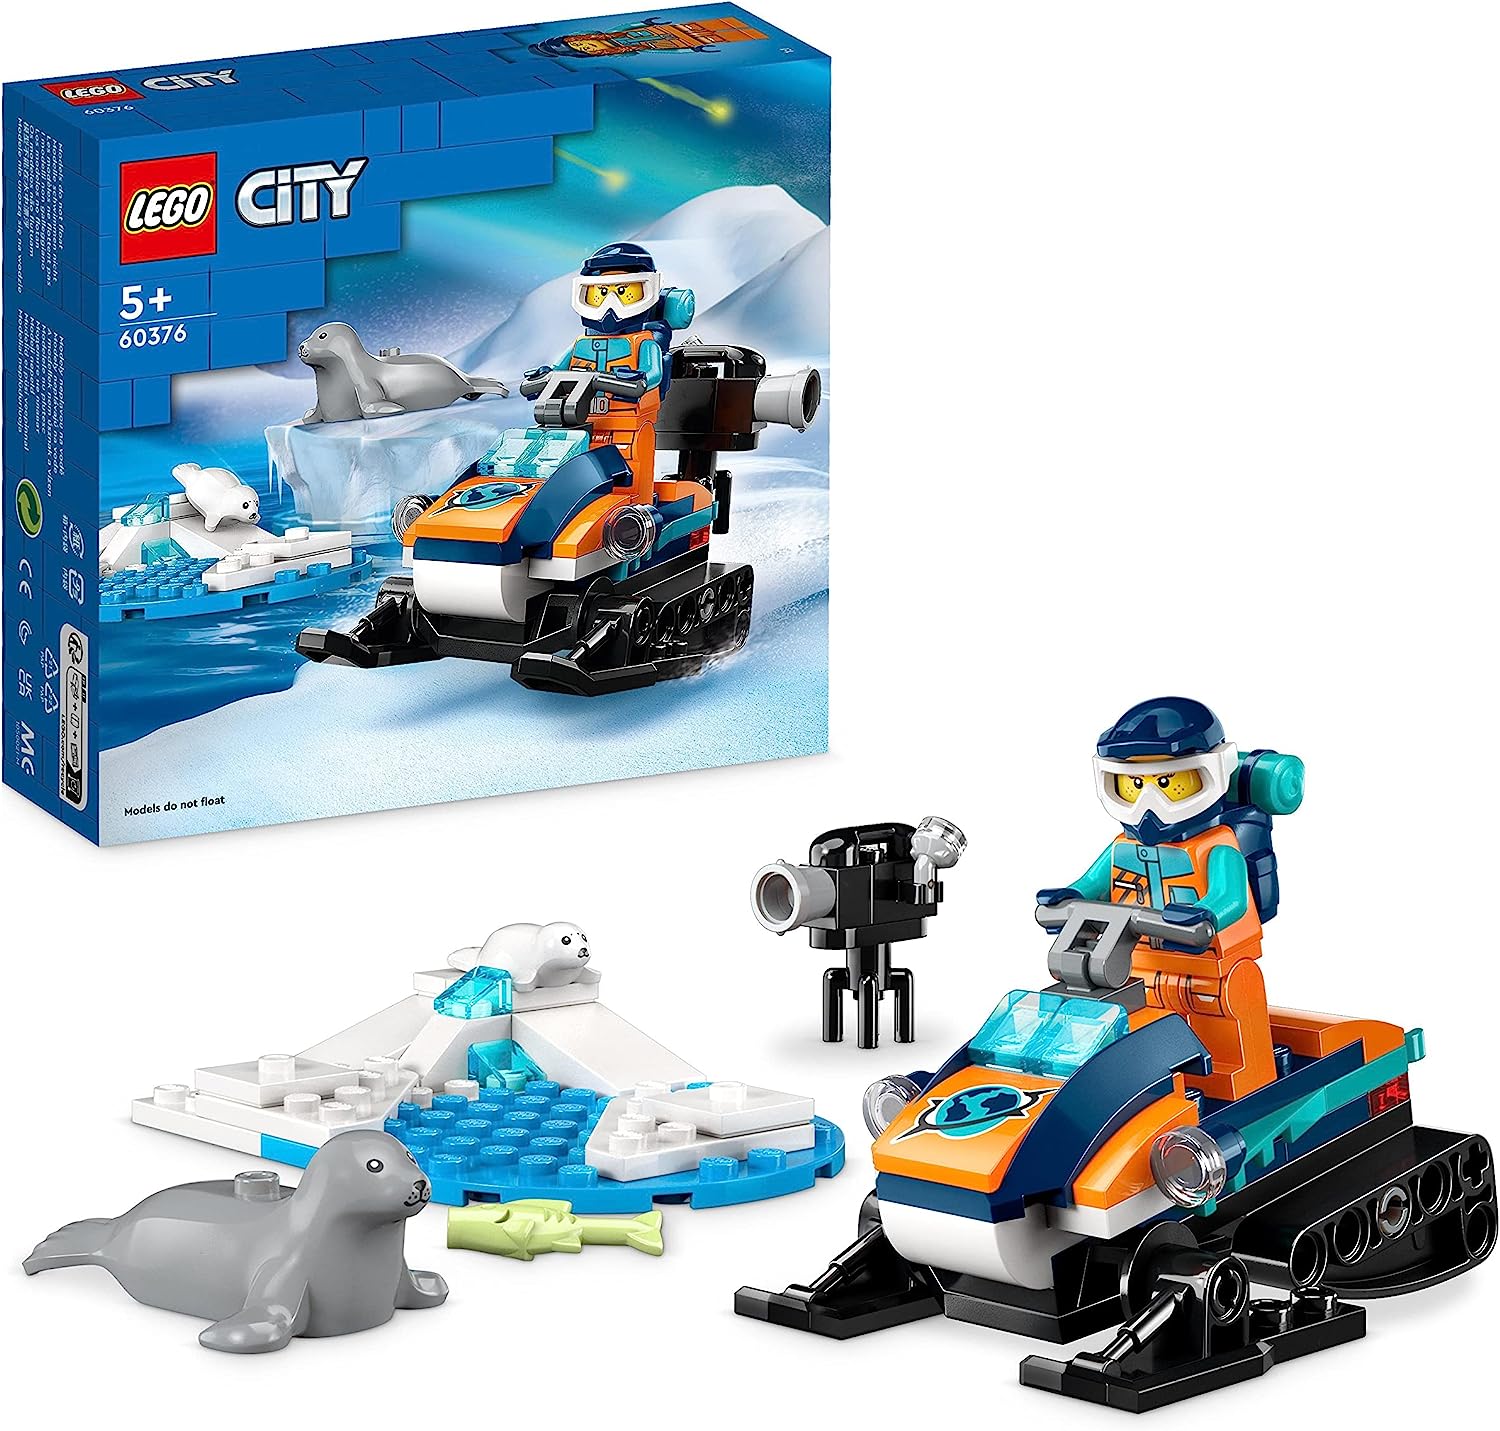 LEGO 60376 City Arctic Snowmobile, Construction Toy Set with 3 Animal Figures and An Explorer Mini Figure, Toy for Children from 5 years